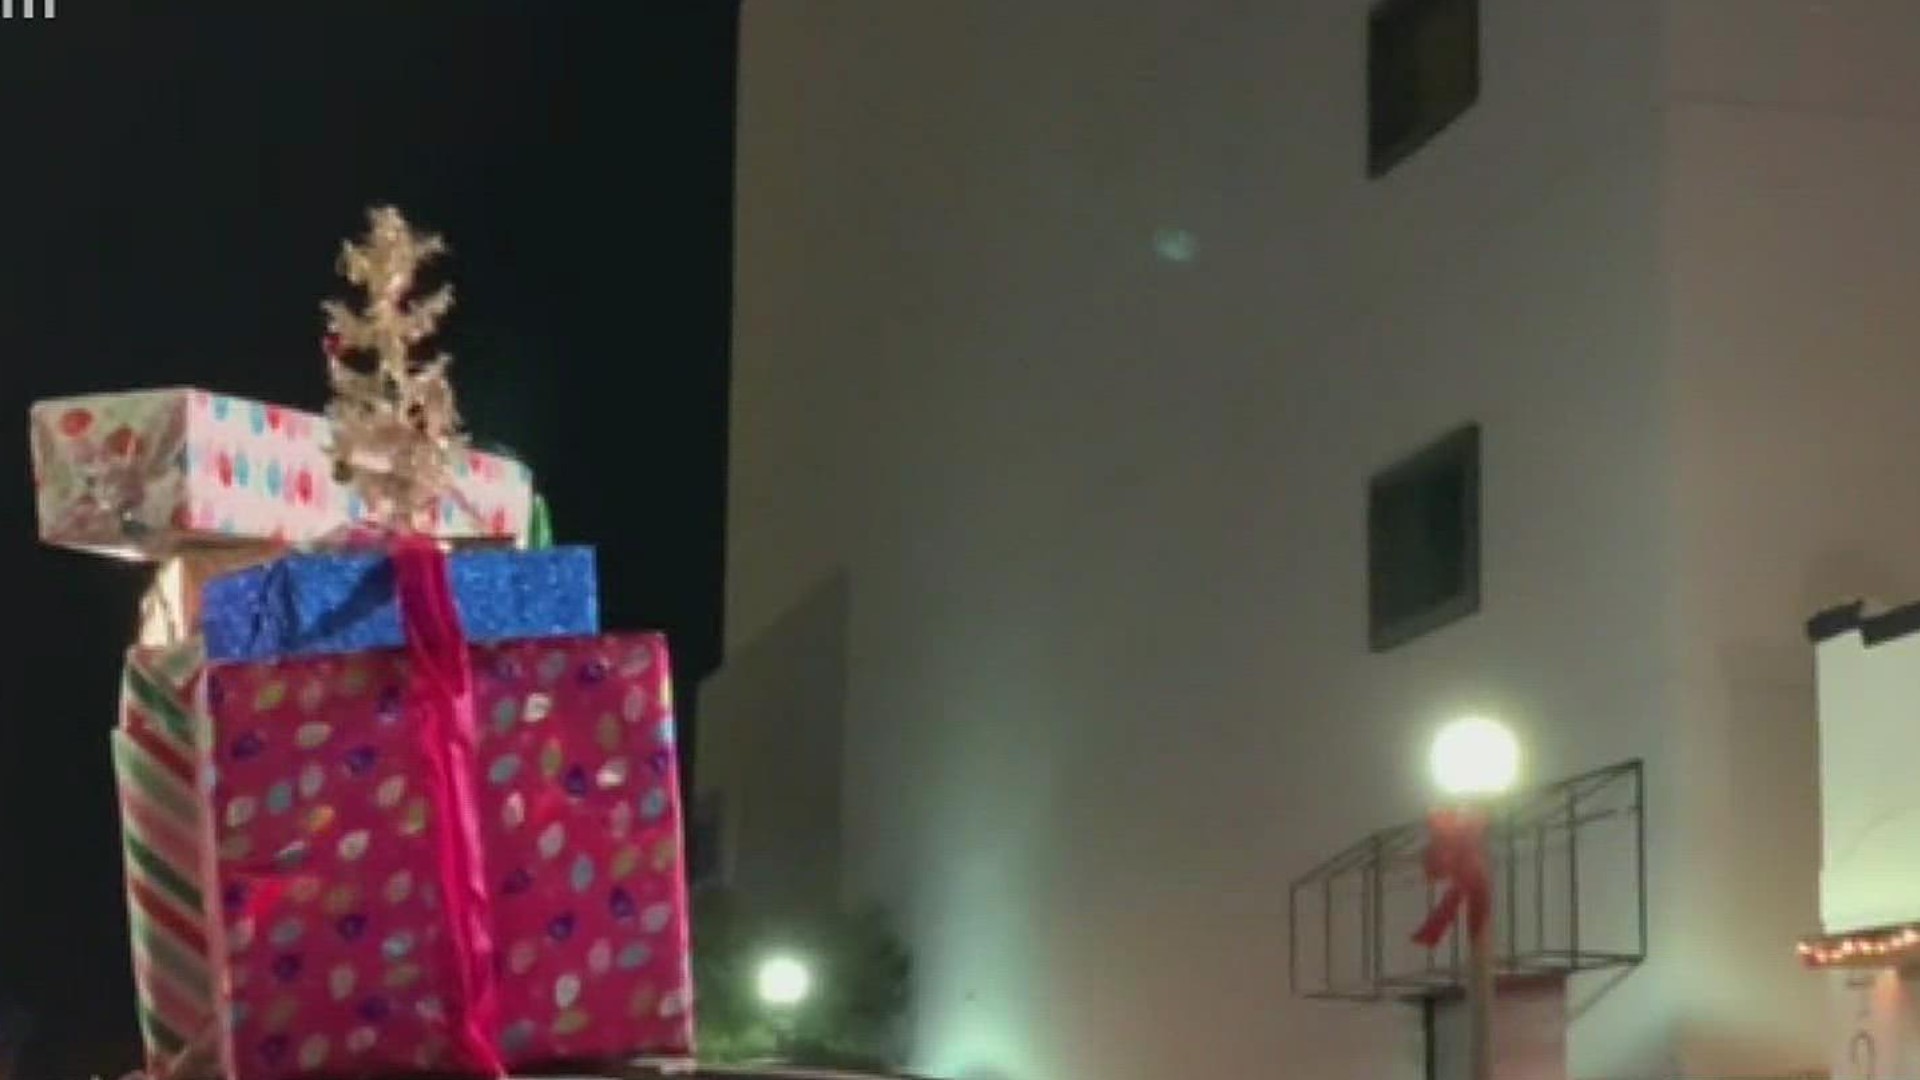 Executive Director of the Corpus Christi Downtown, Alyssa Barrera-Mason said that the event gives those a chance to experience the holiday spirit.